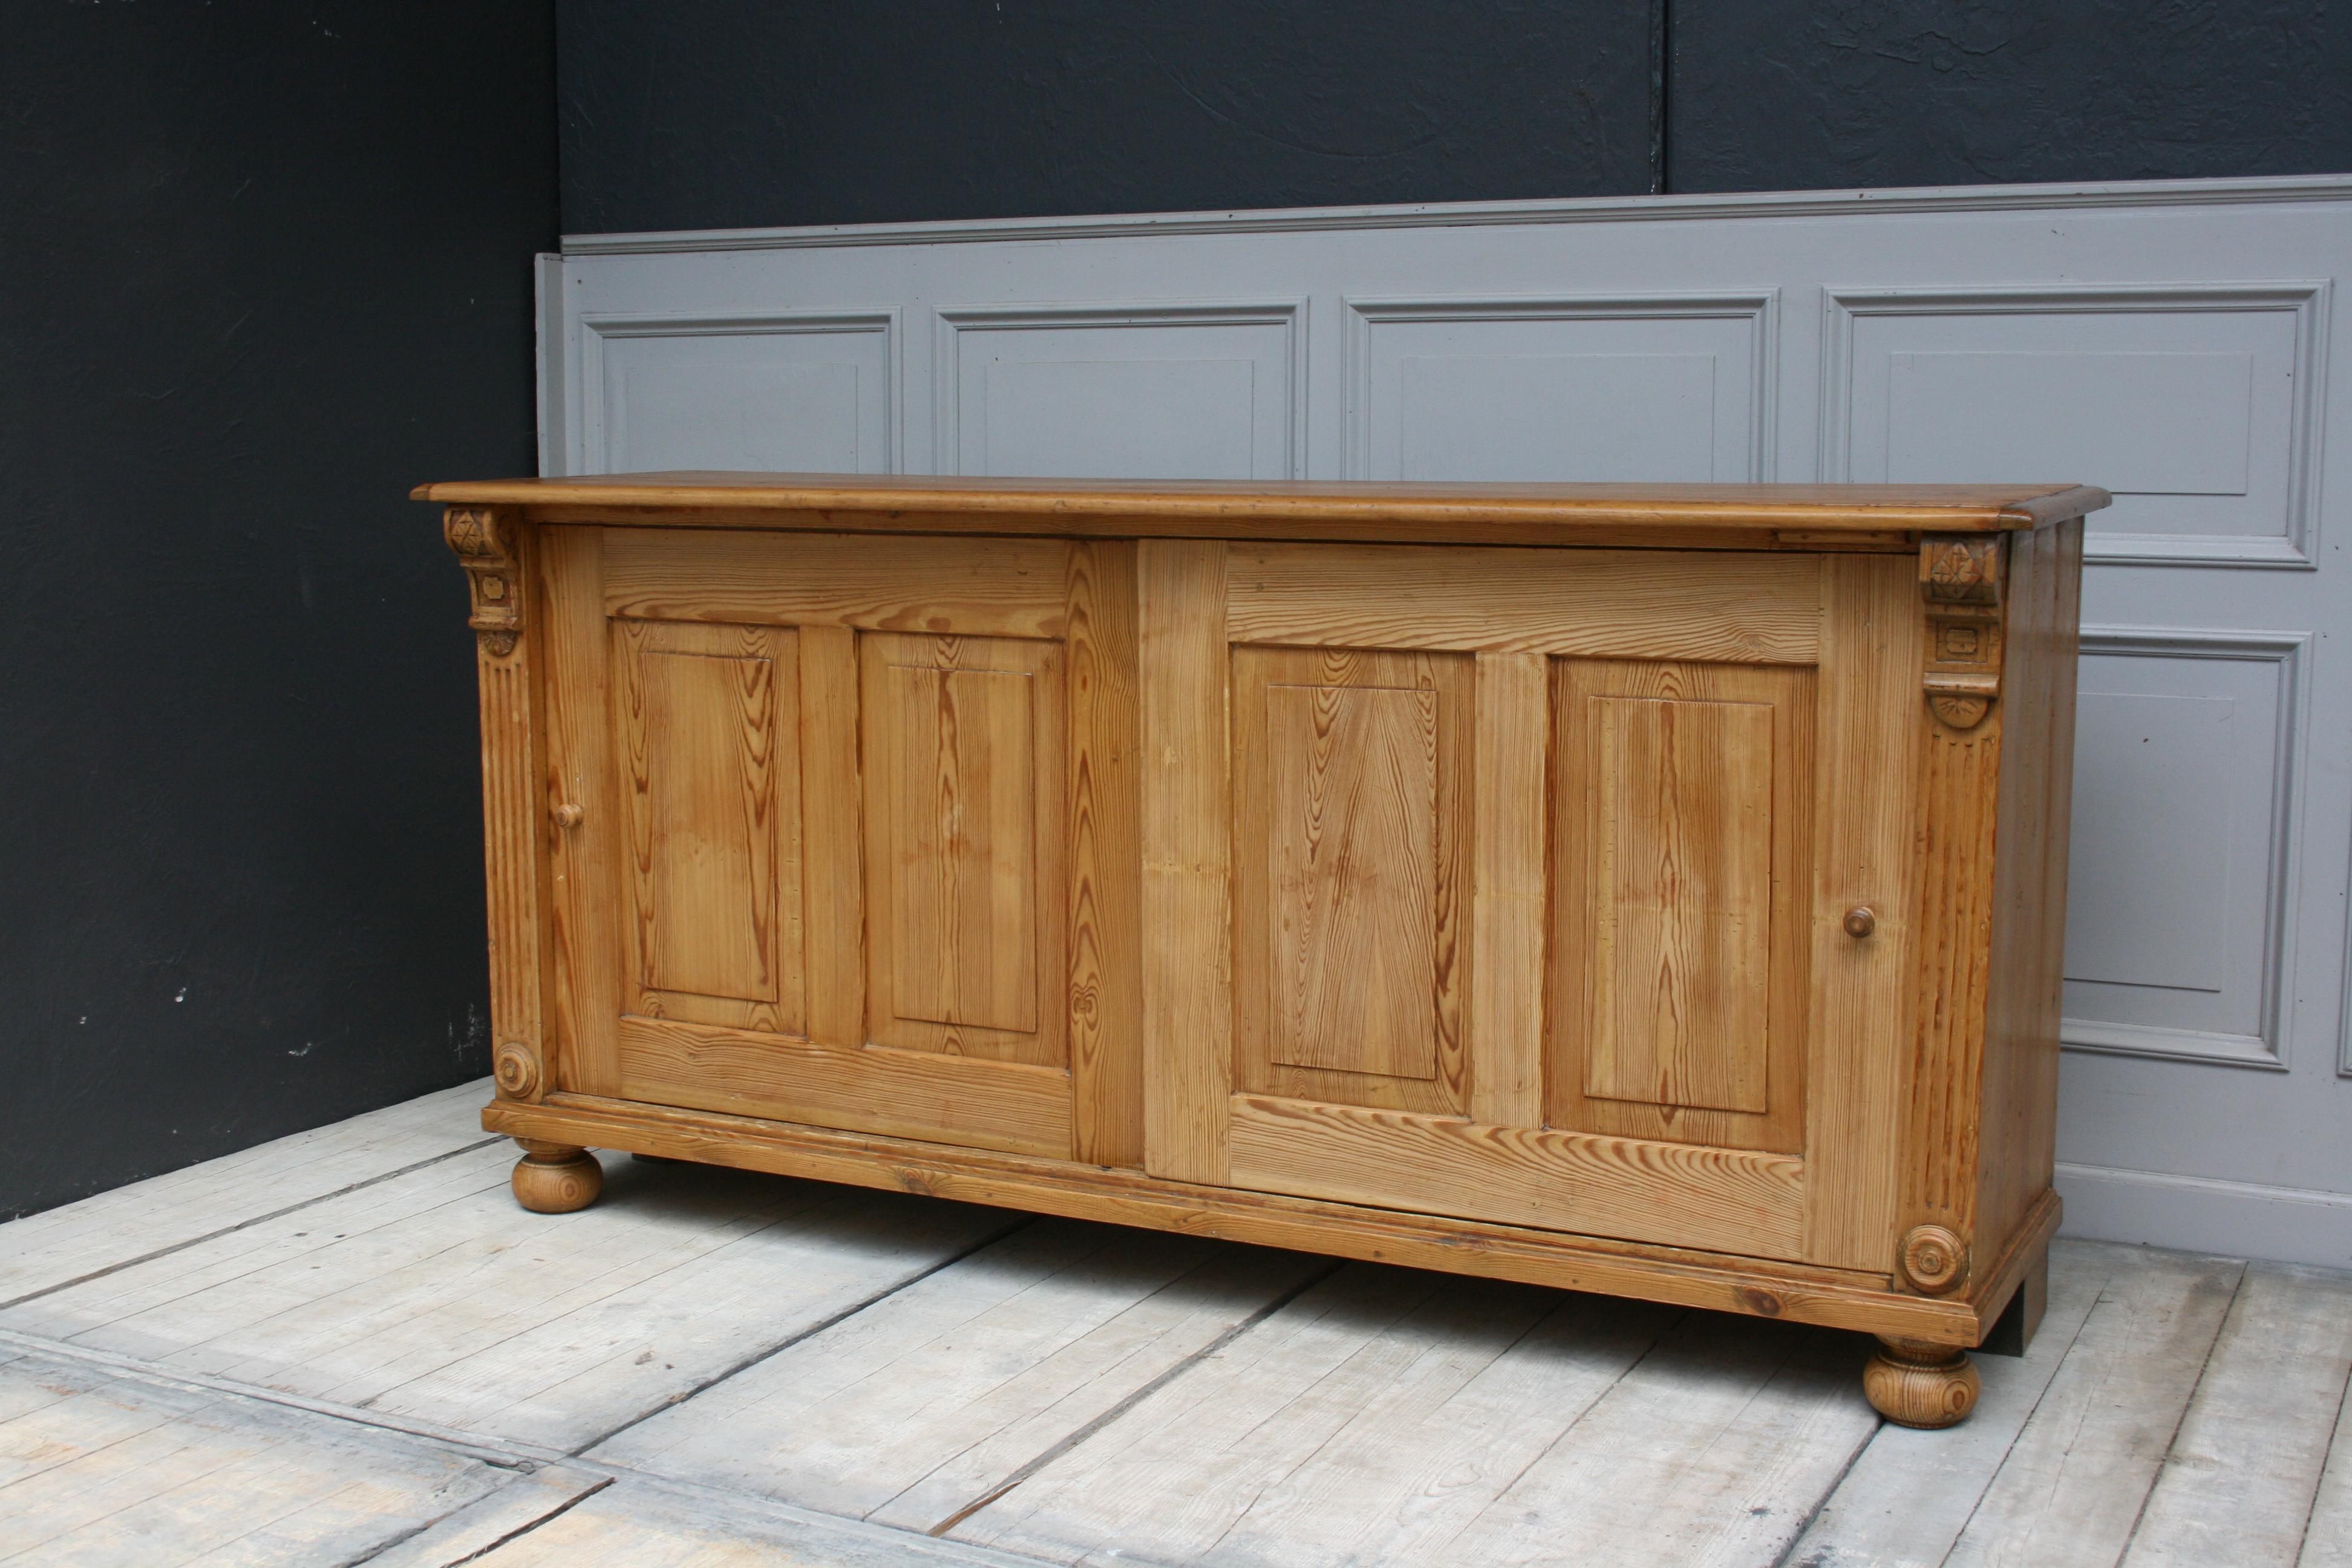 Original Old Wilhelminian sideboard with sliding doors made of fir wood, circa 1860-1870. Refurbished ready for home. The body of the furniture is waxed. The plate was completely sanded and painted several times with transparent parquet